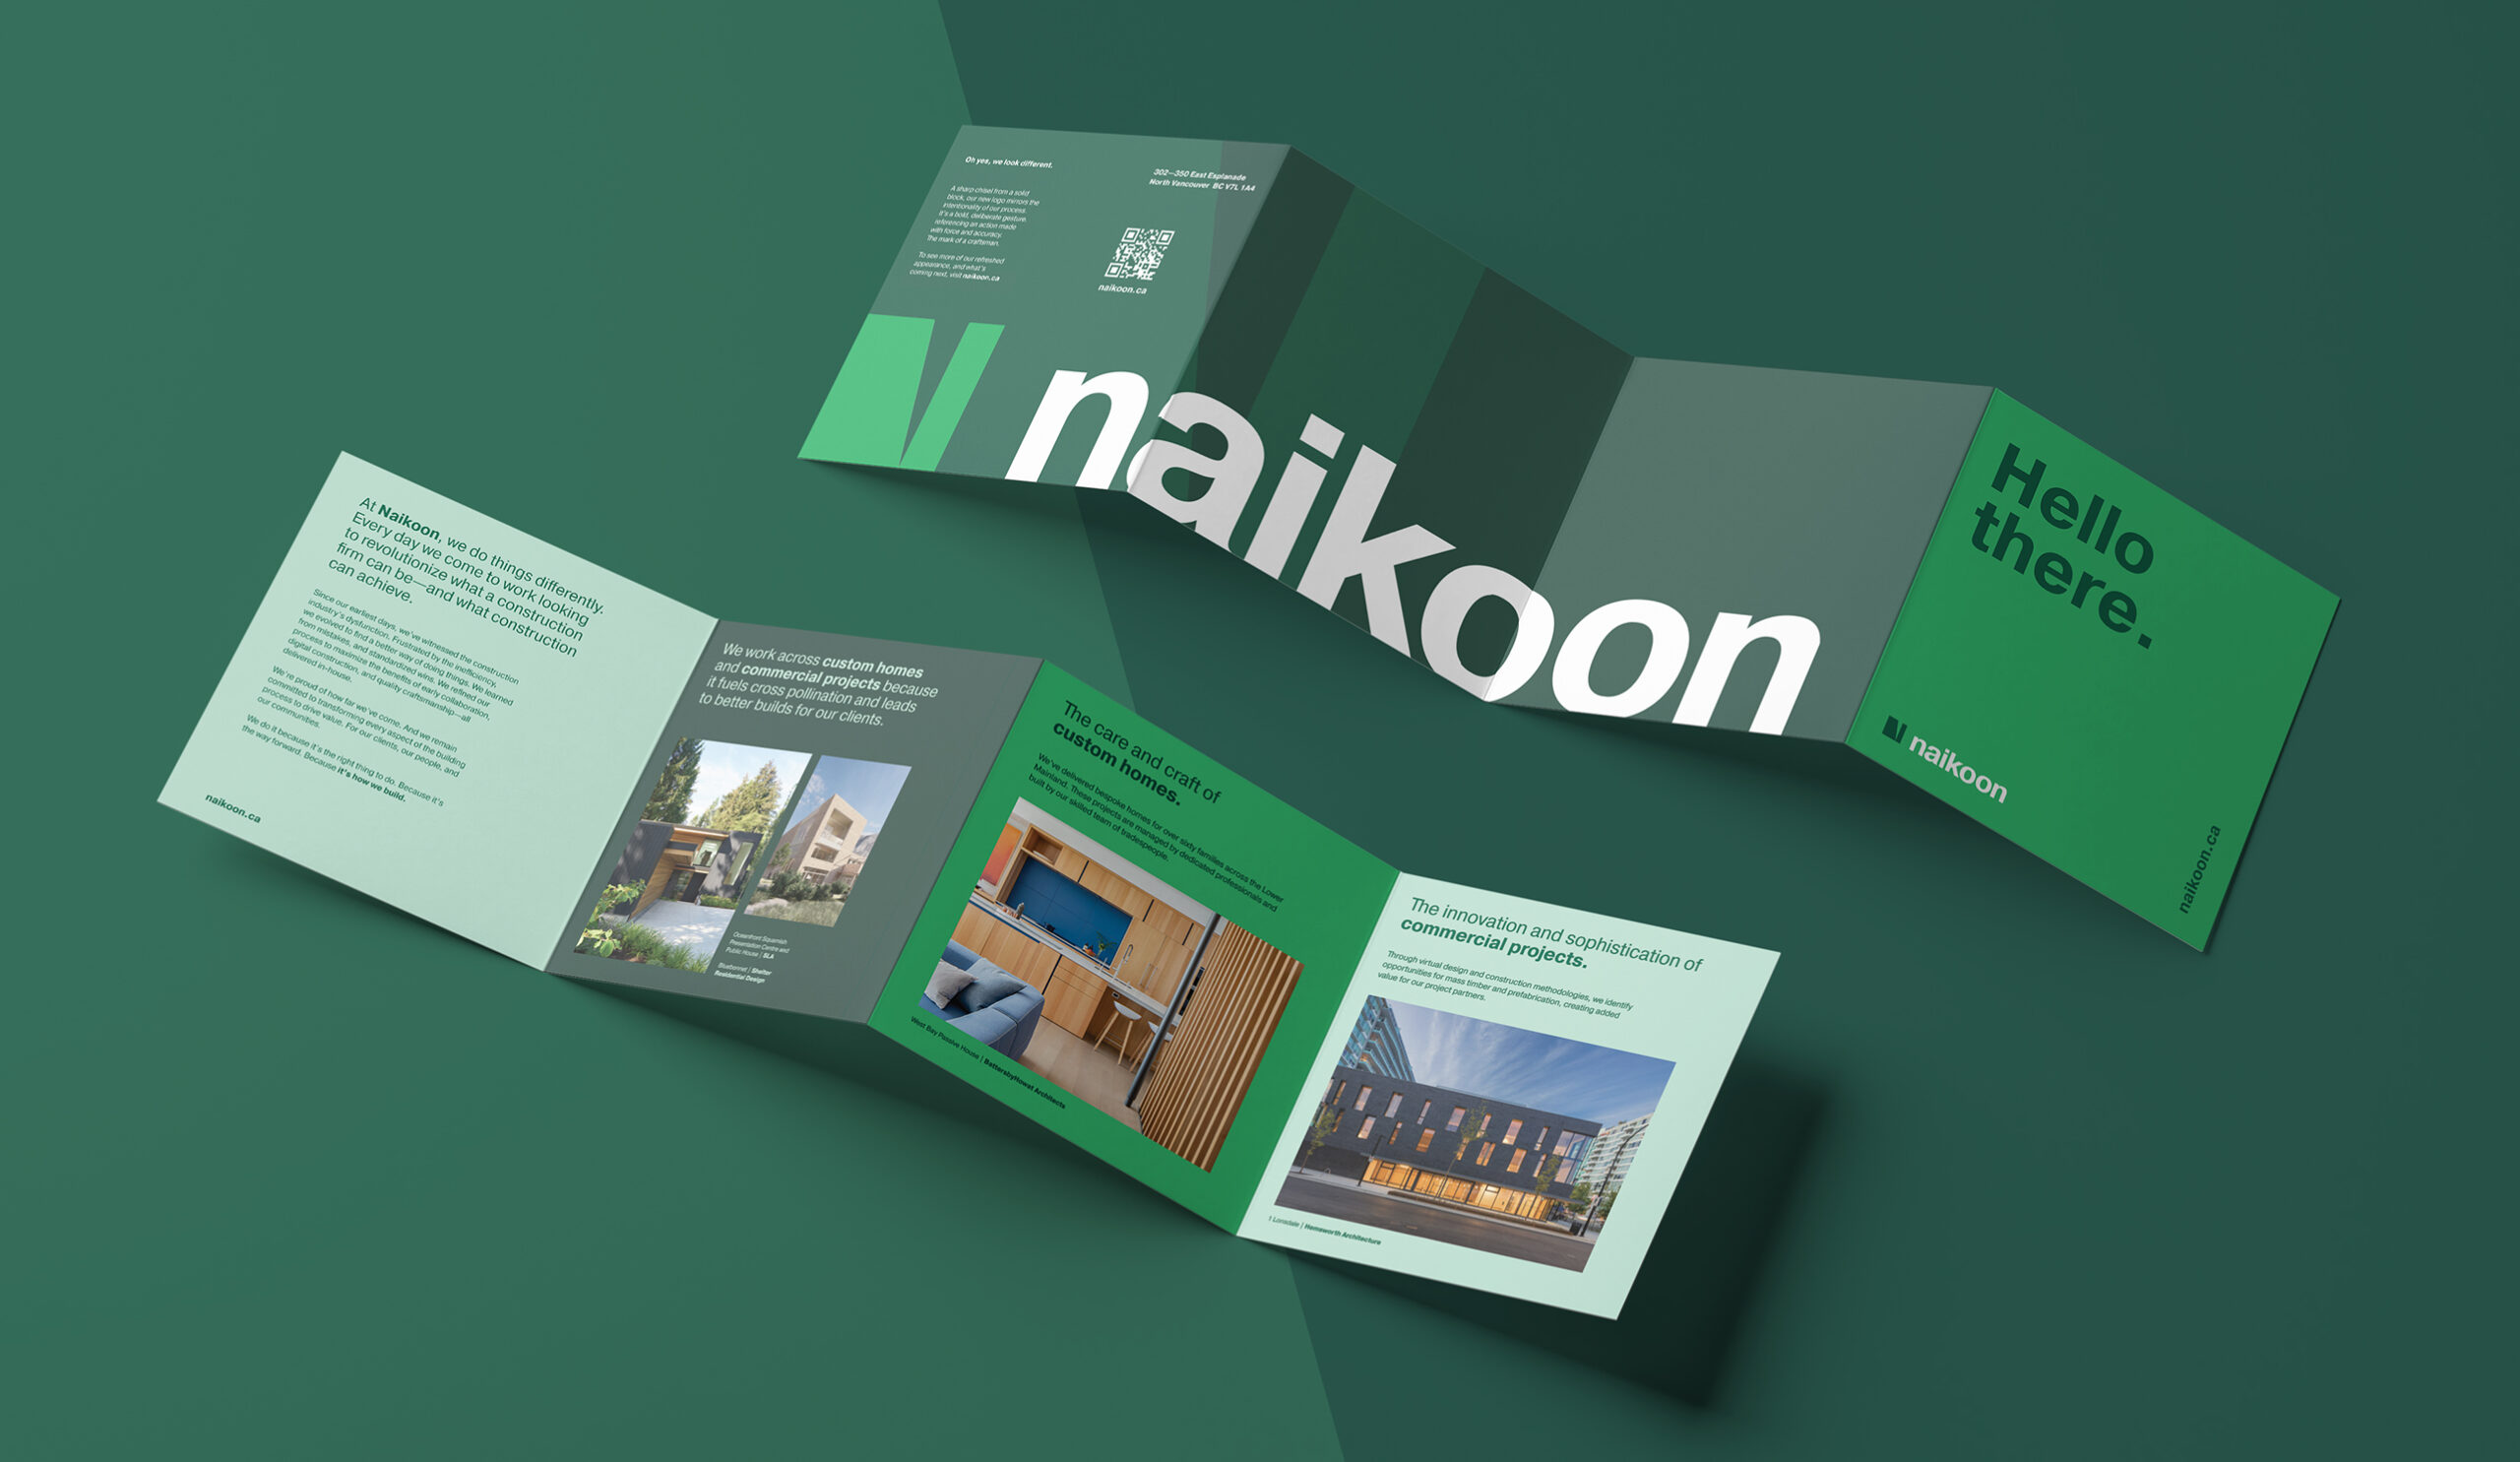 The Naikoon rebrand launch brochure makes bold use of the three different greens in the brand palette and showcases their commercial and residential work.